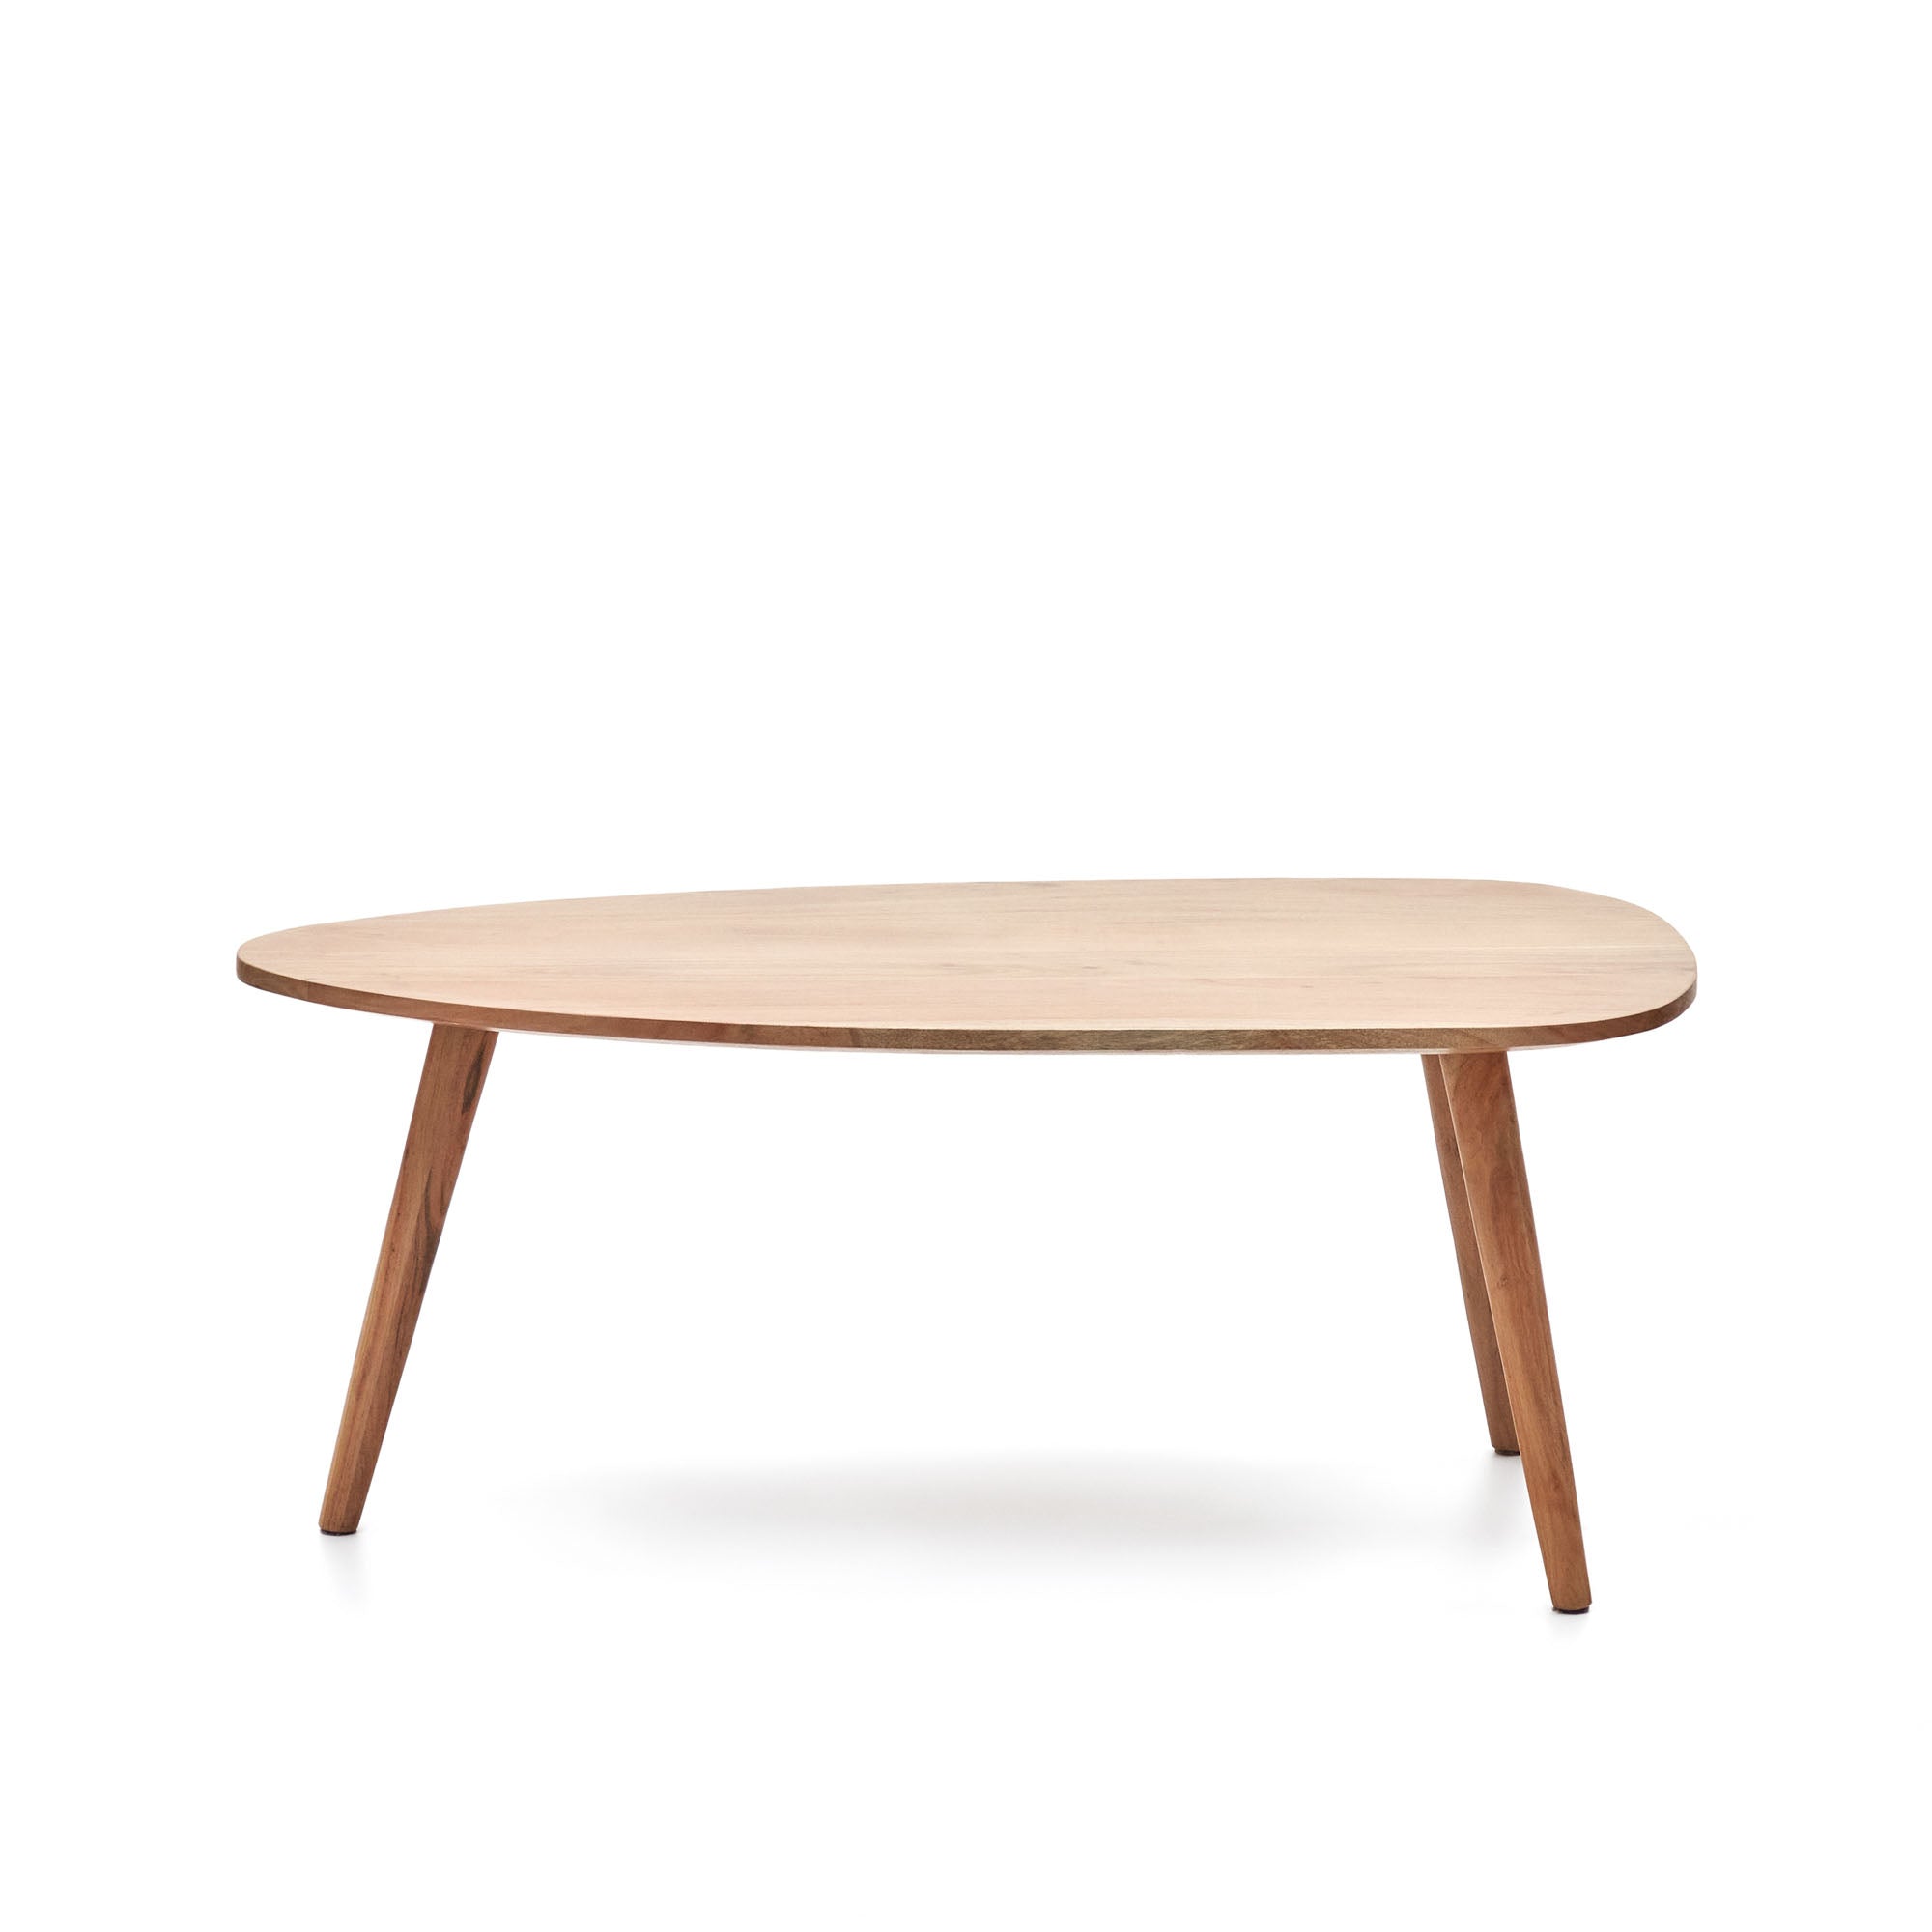 Eluana coffee table in solid acacia with natural finish, Ø 110 x 60 cm